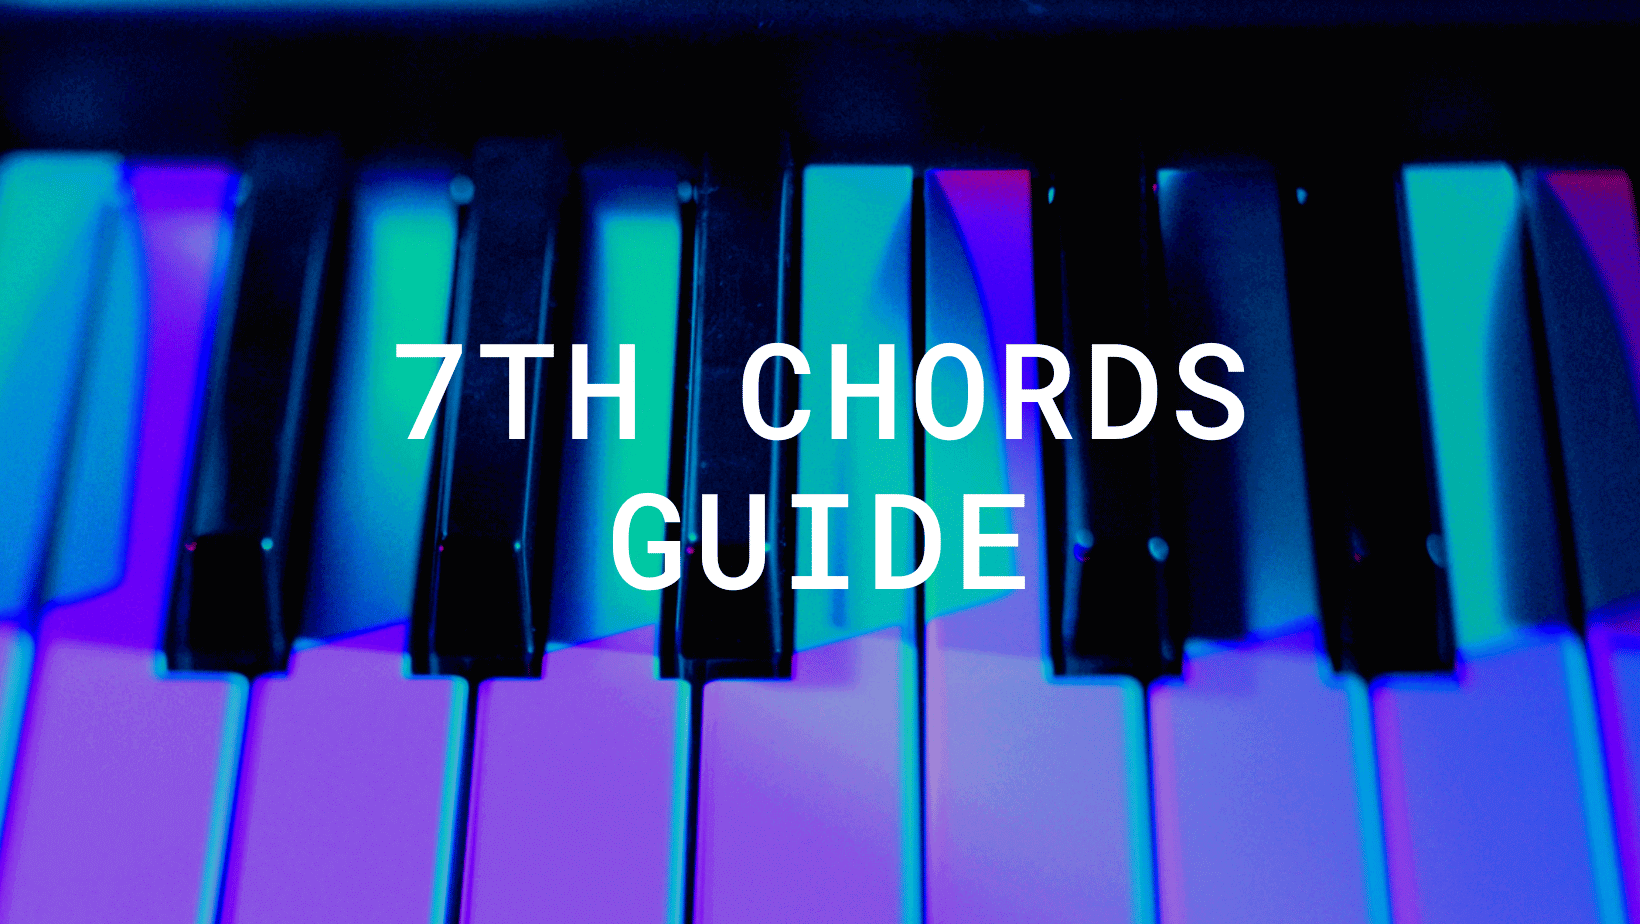 7th Chords Guide